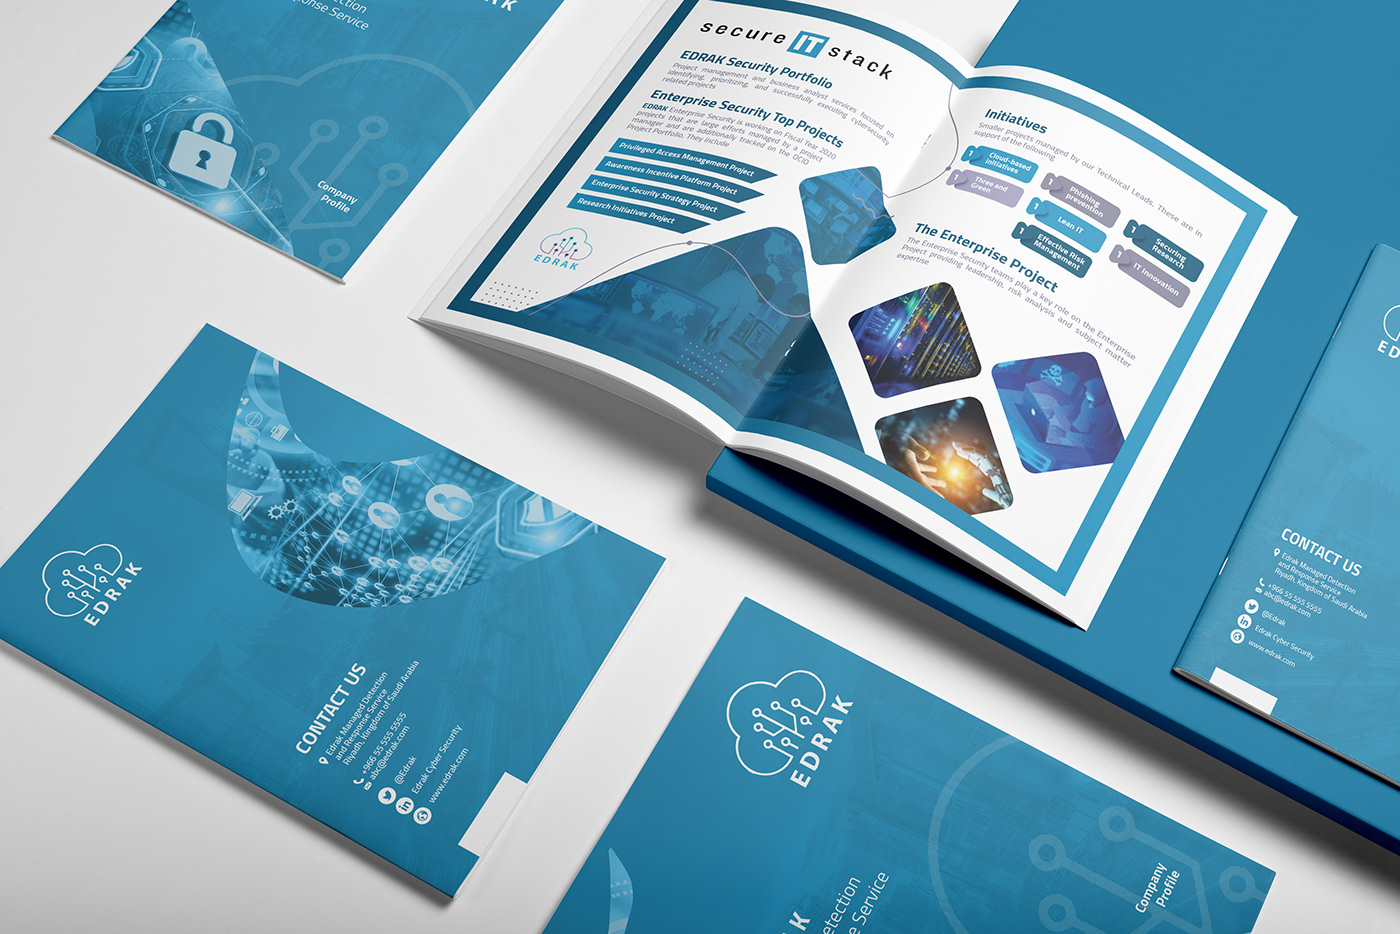 brochure communications Cyber Security portfolio profile projects